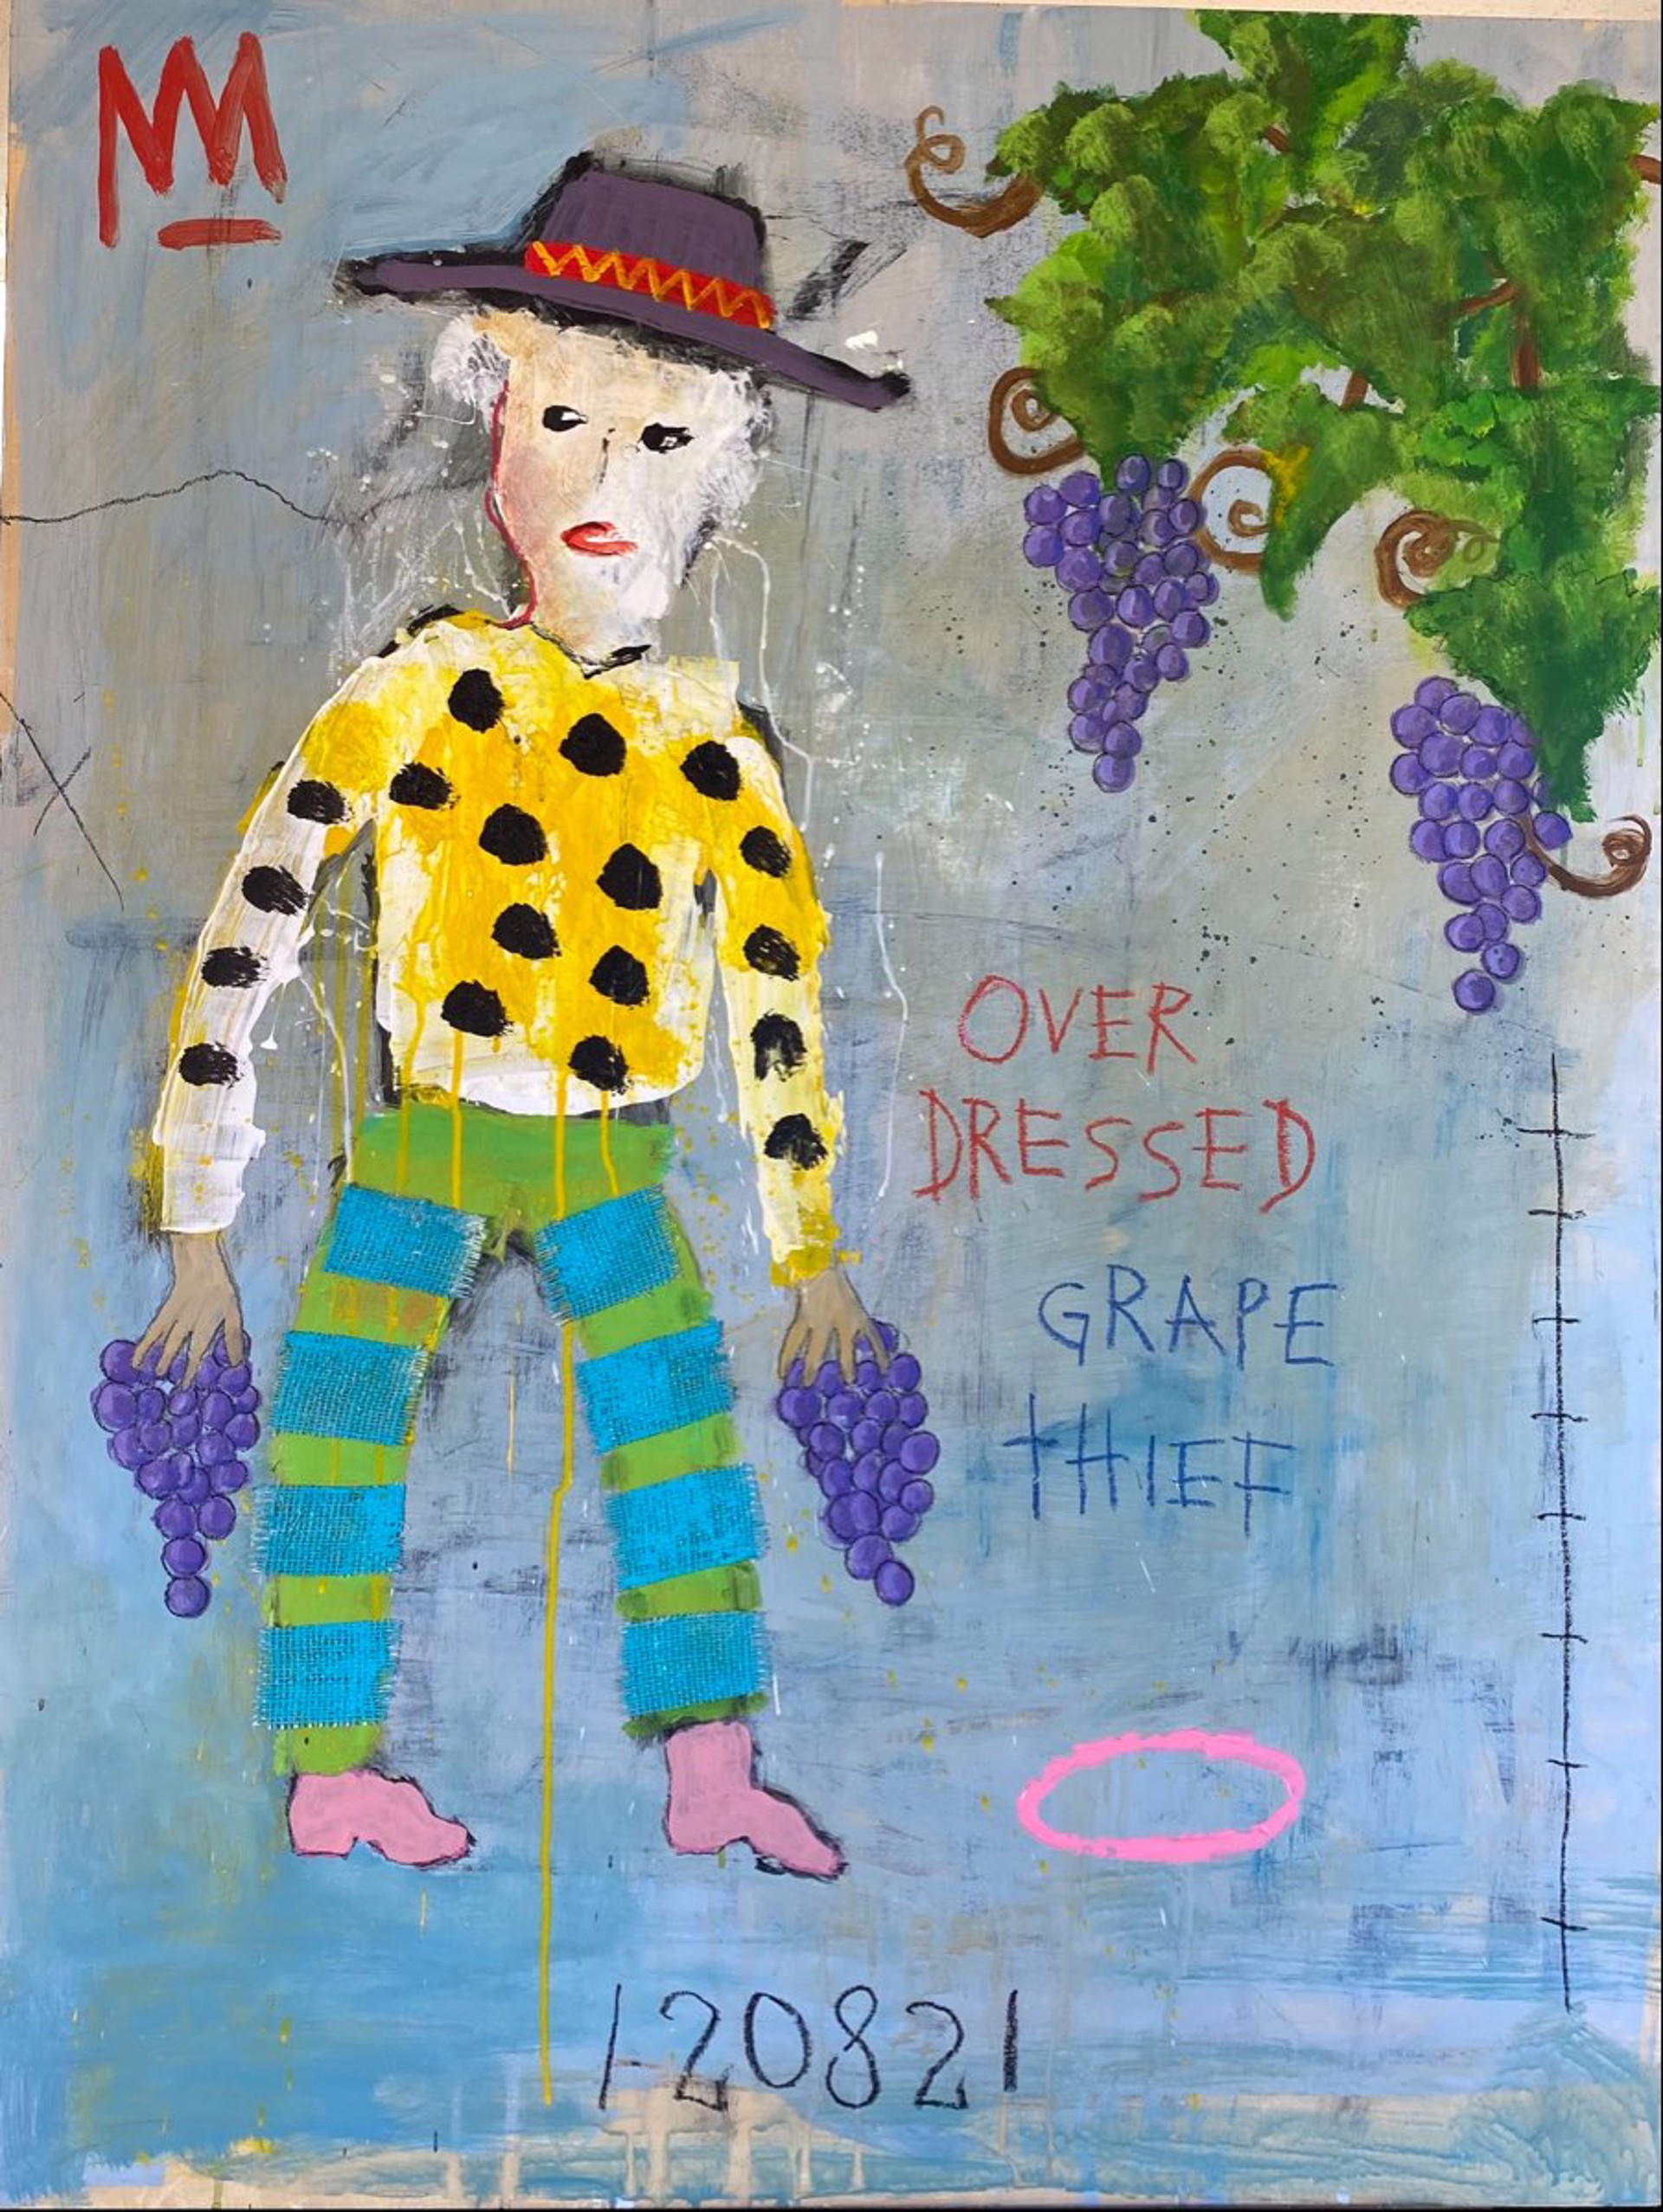 Overdressed Grape Thief by Michael Snodgrass